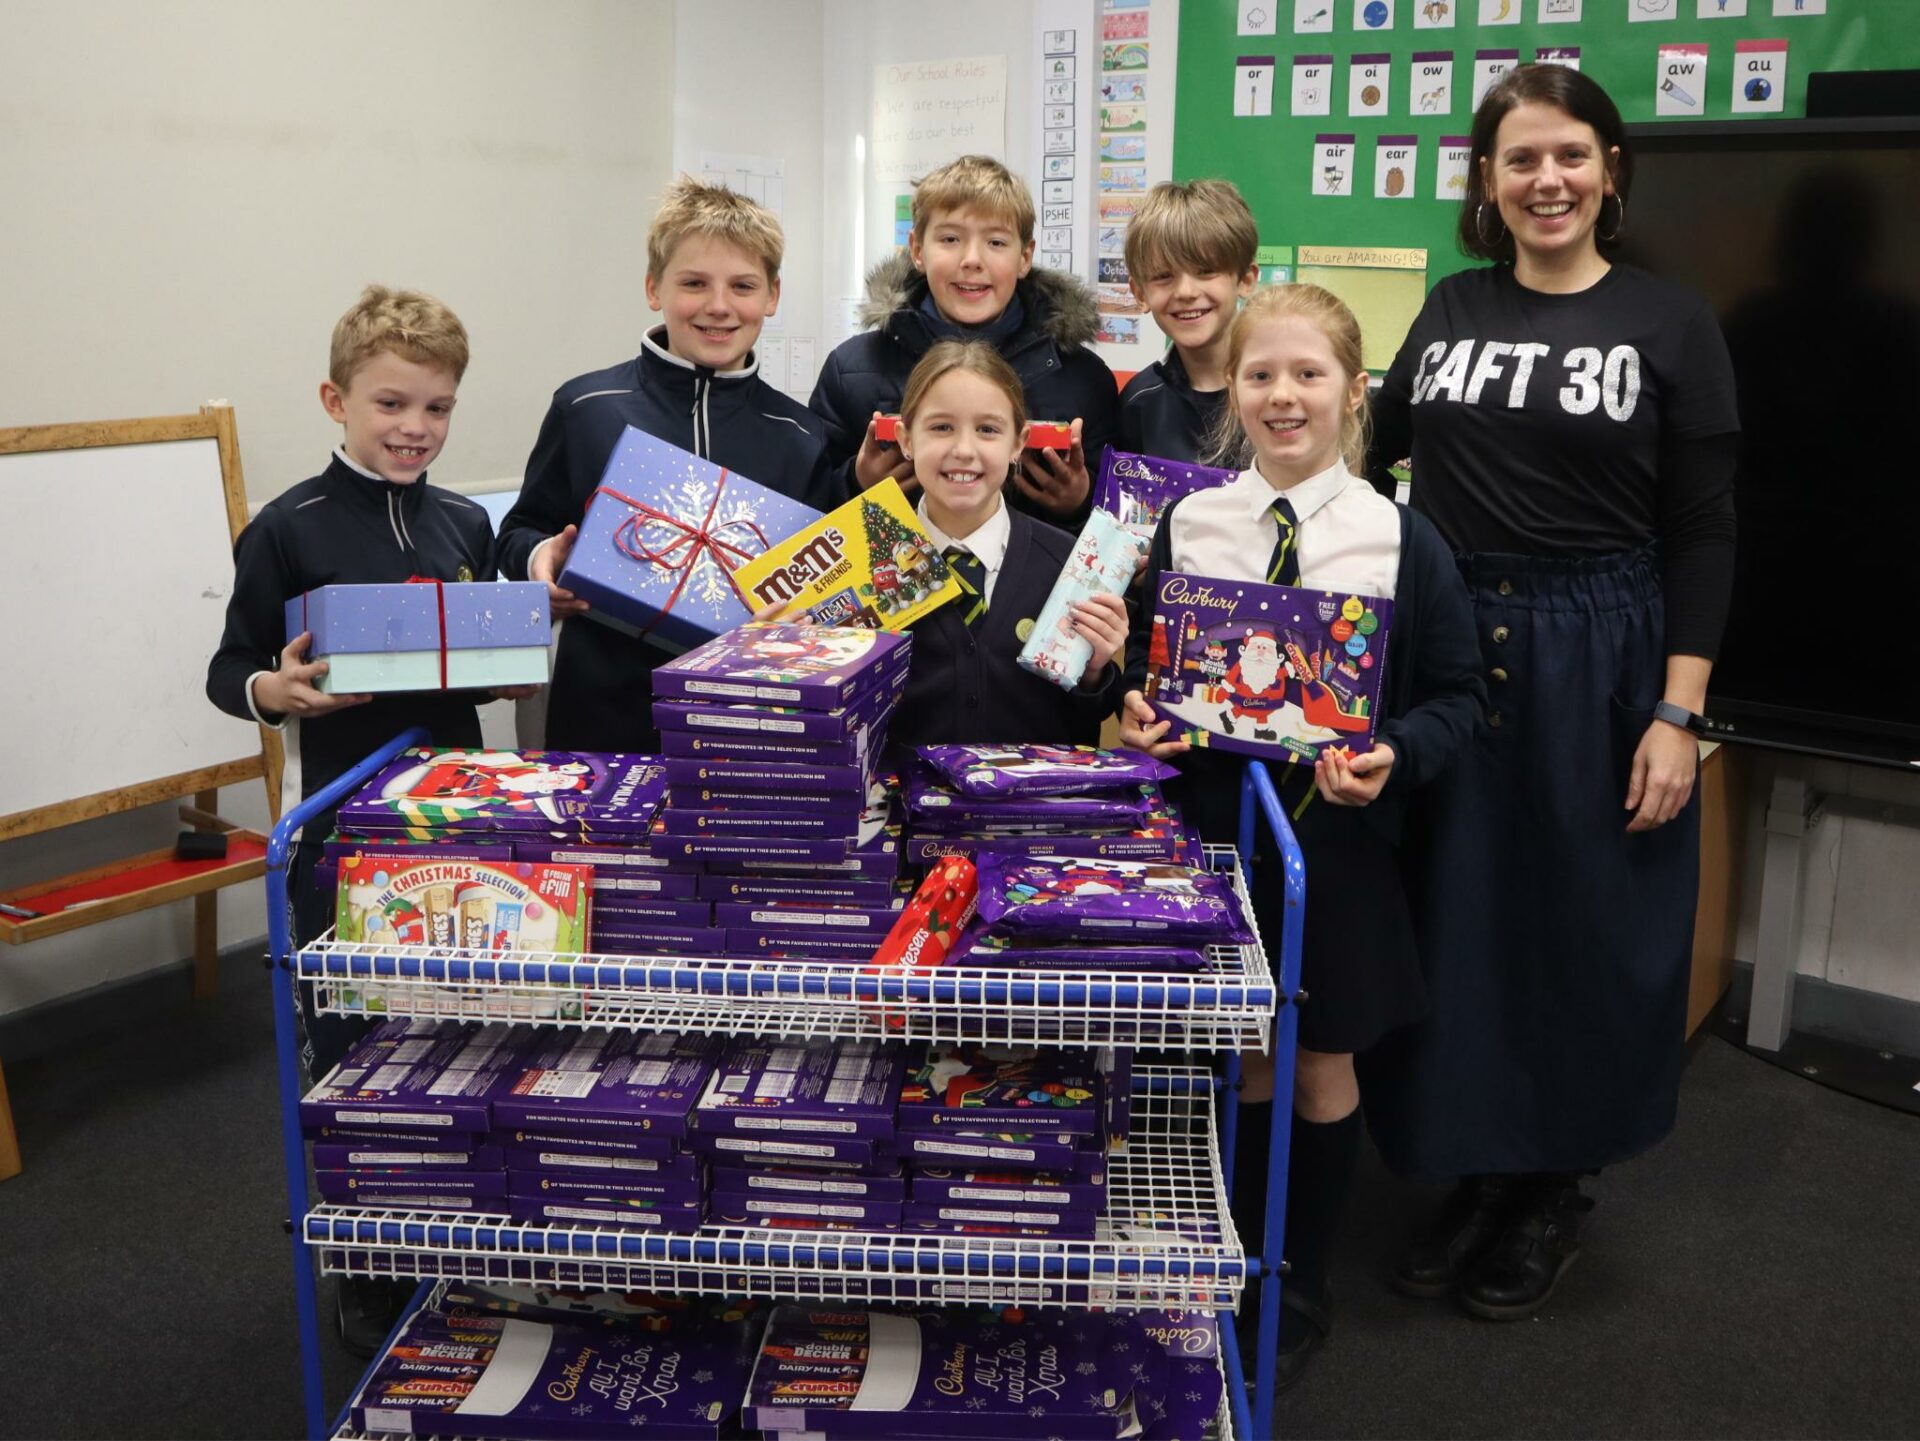 Pupils from the Treasury give the donated selection boxes to Hannah from CAFT